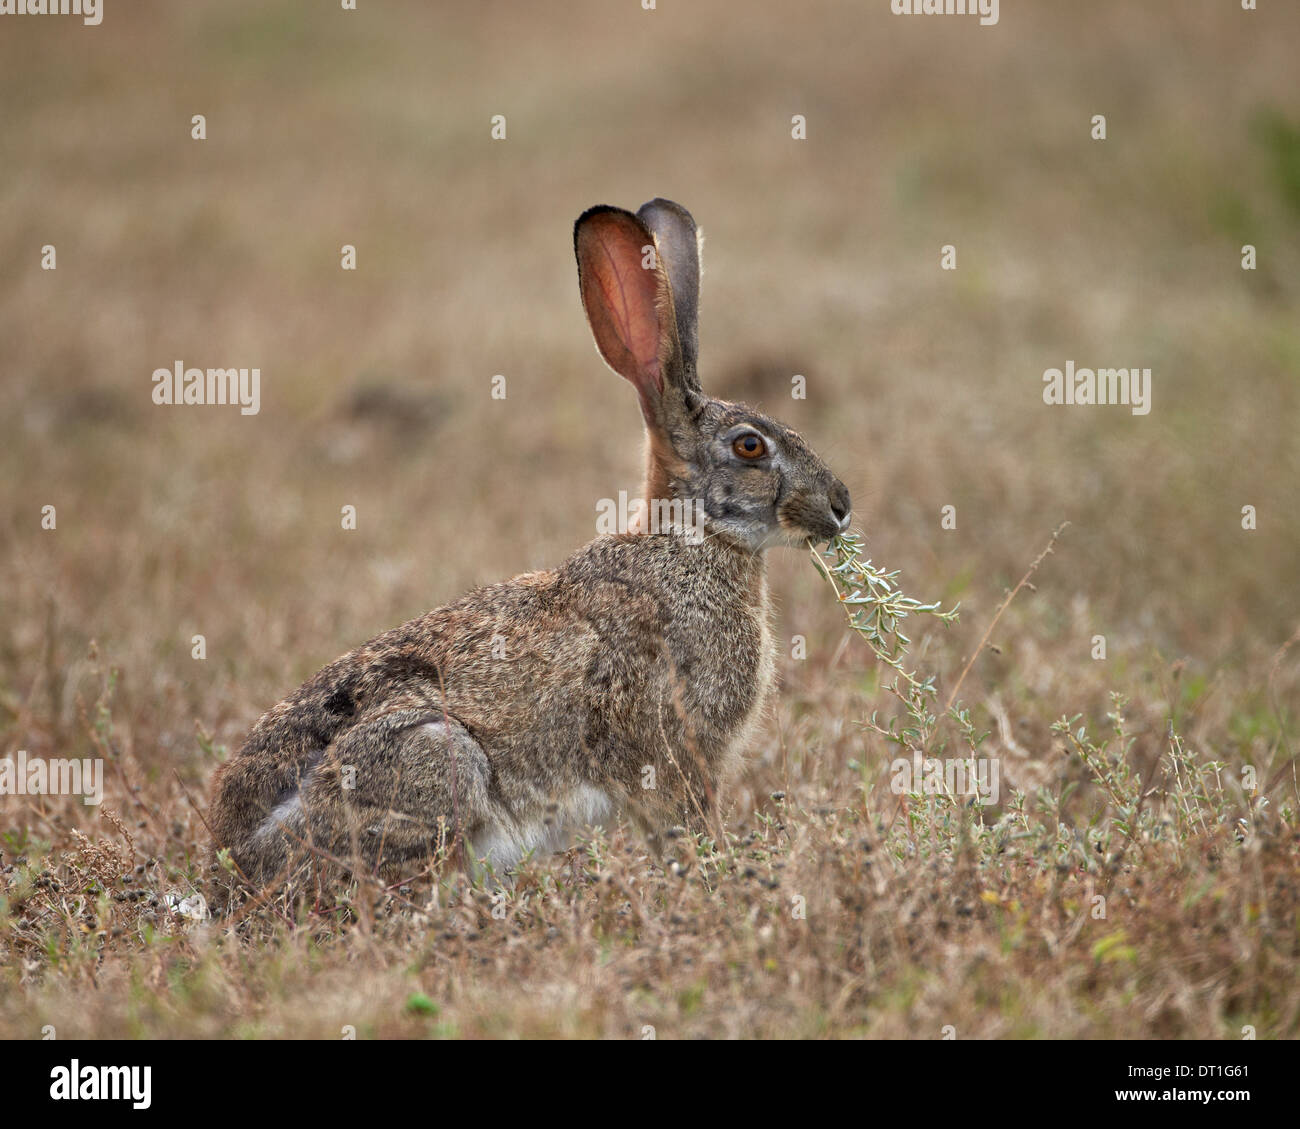 African hare (Cape hare) (brown hare) (Lepus capensis) eating, Addo Elephant National Park, South Africa, Africa Stock Photo